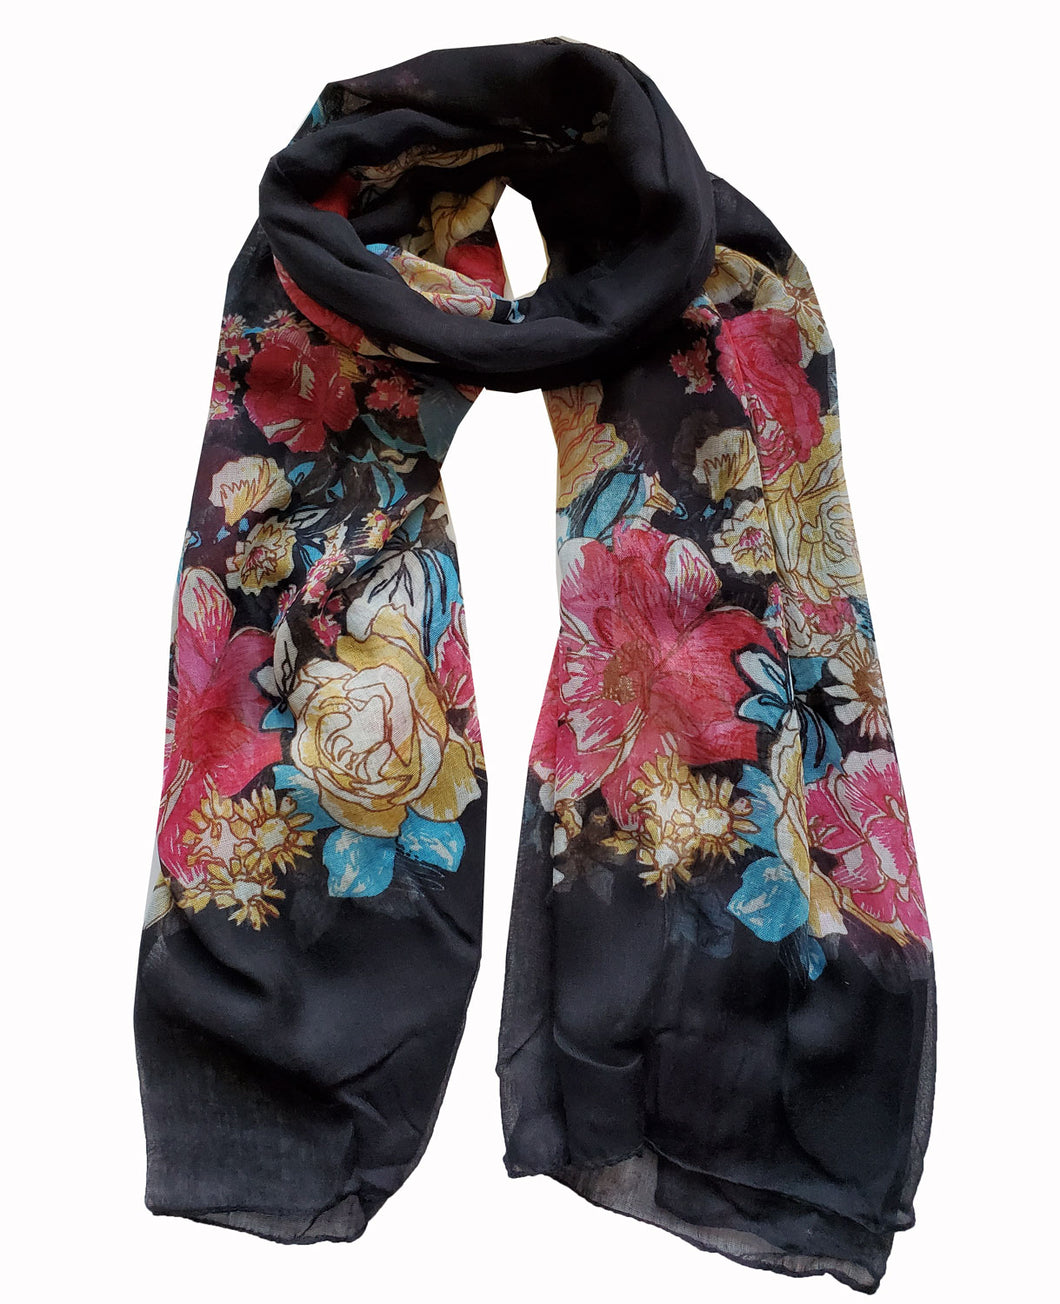 Flower Rose Scarf Lightweight Scarves for Women Girls FashionSolid